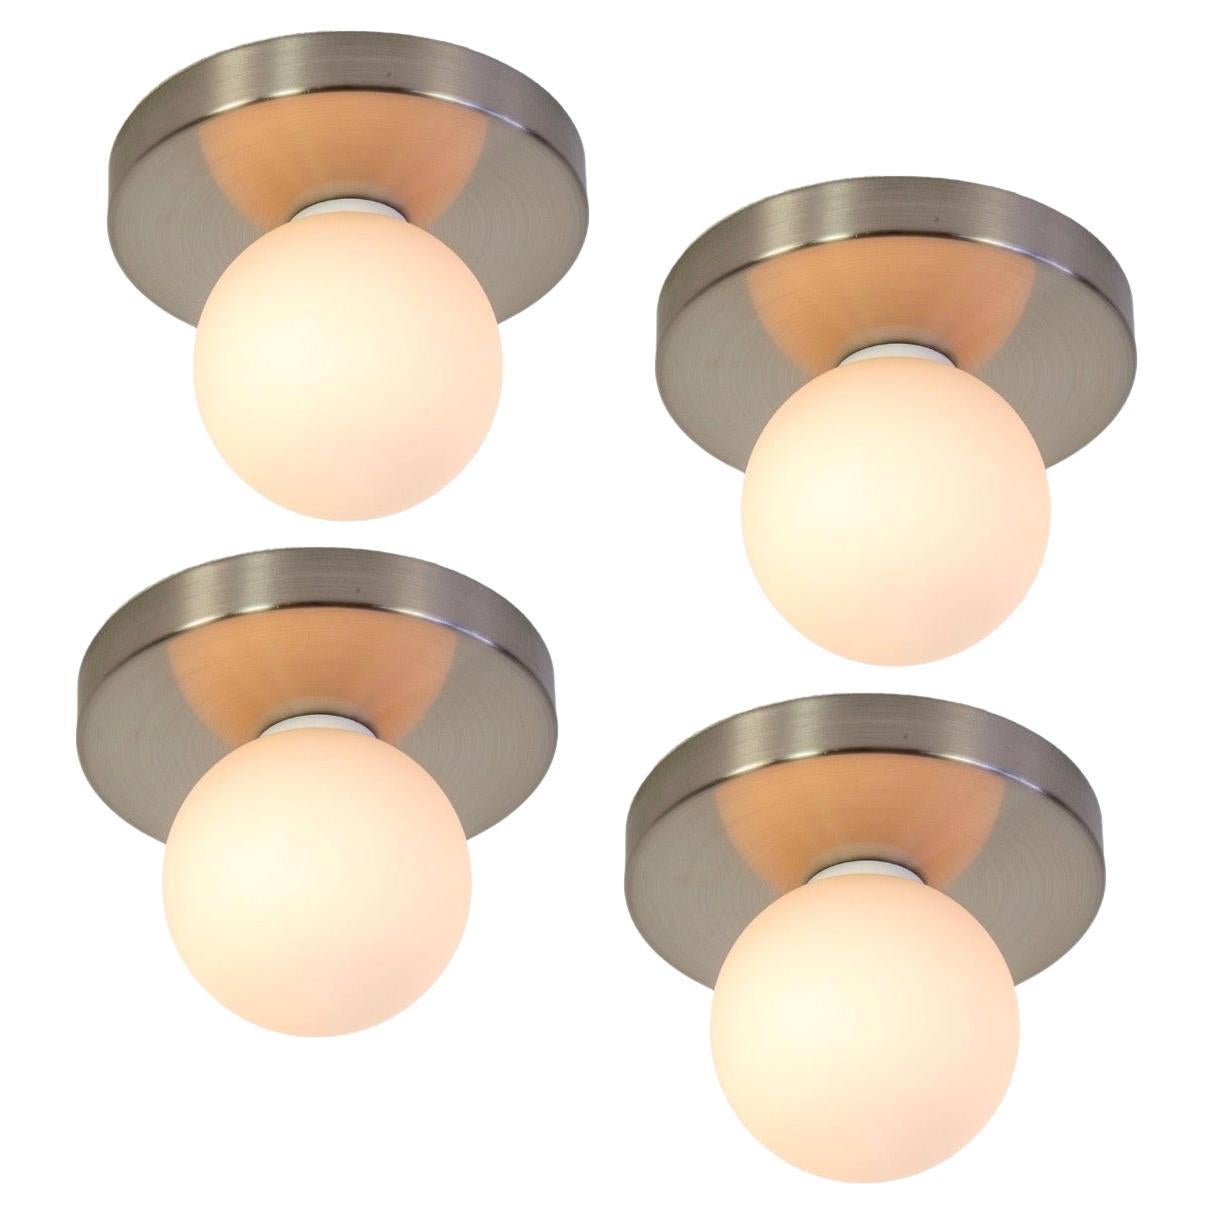 Set of 4 Globe Flush Mounts by Research.Lighting, Brushed Nickel, Made to Order For Sale